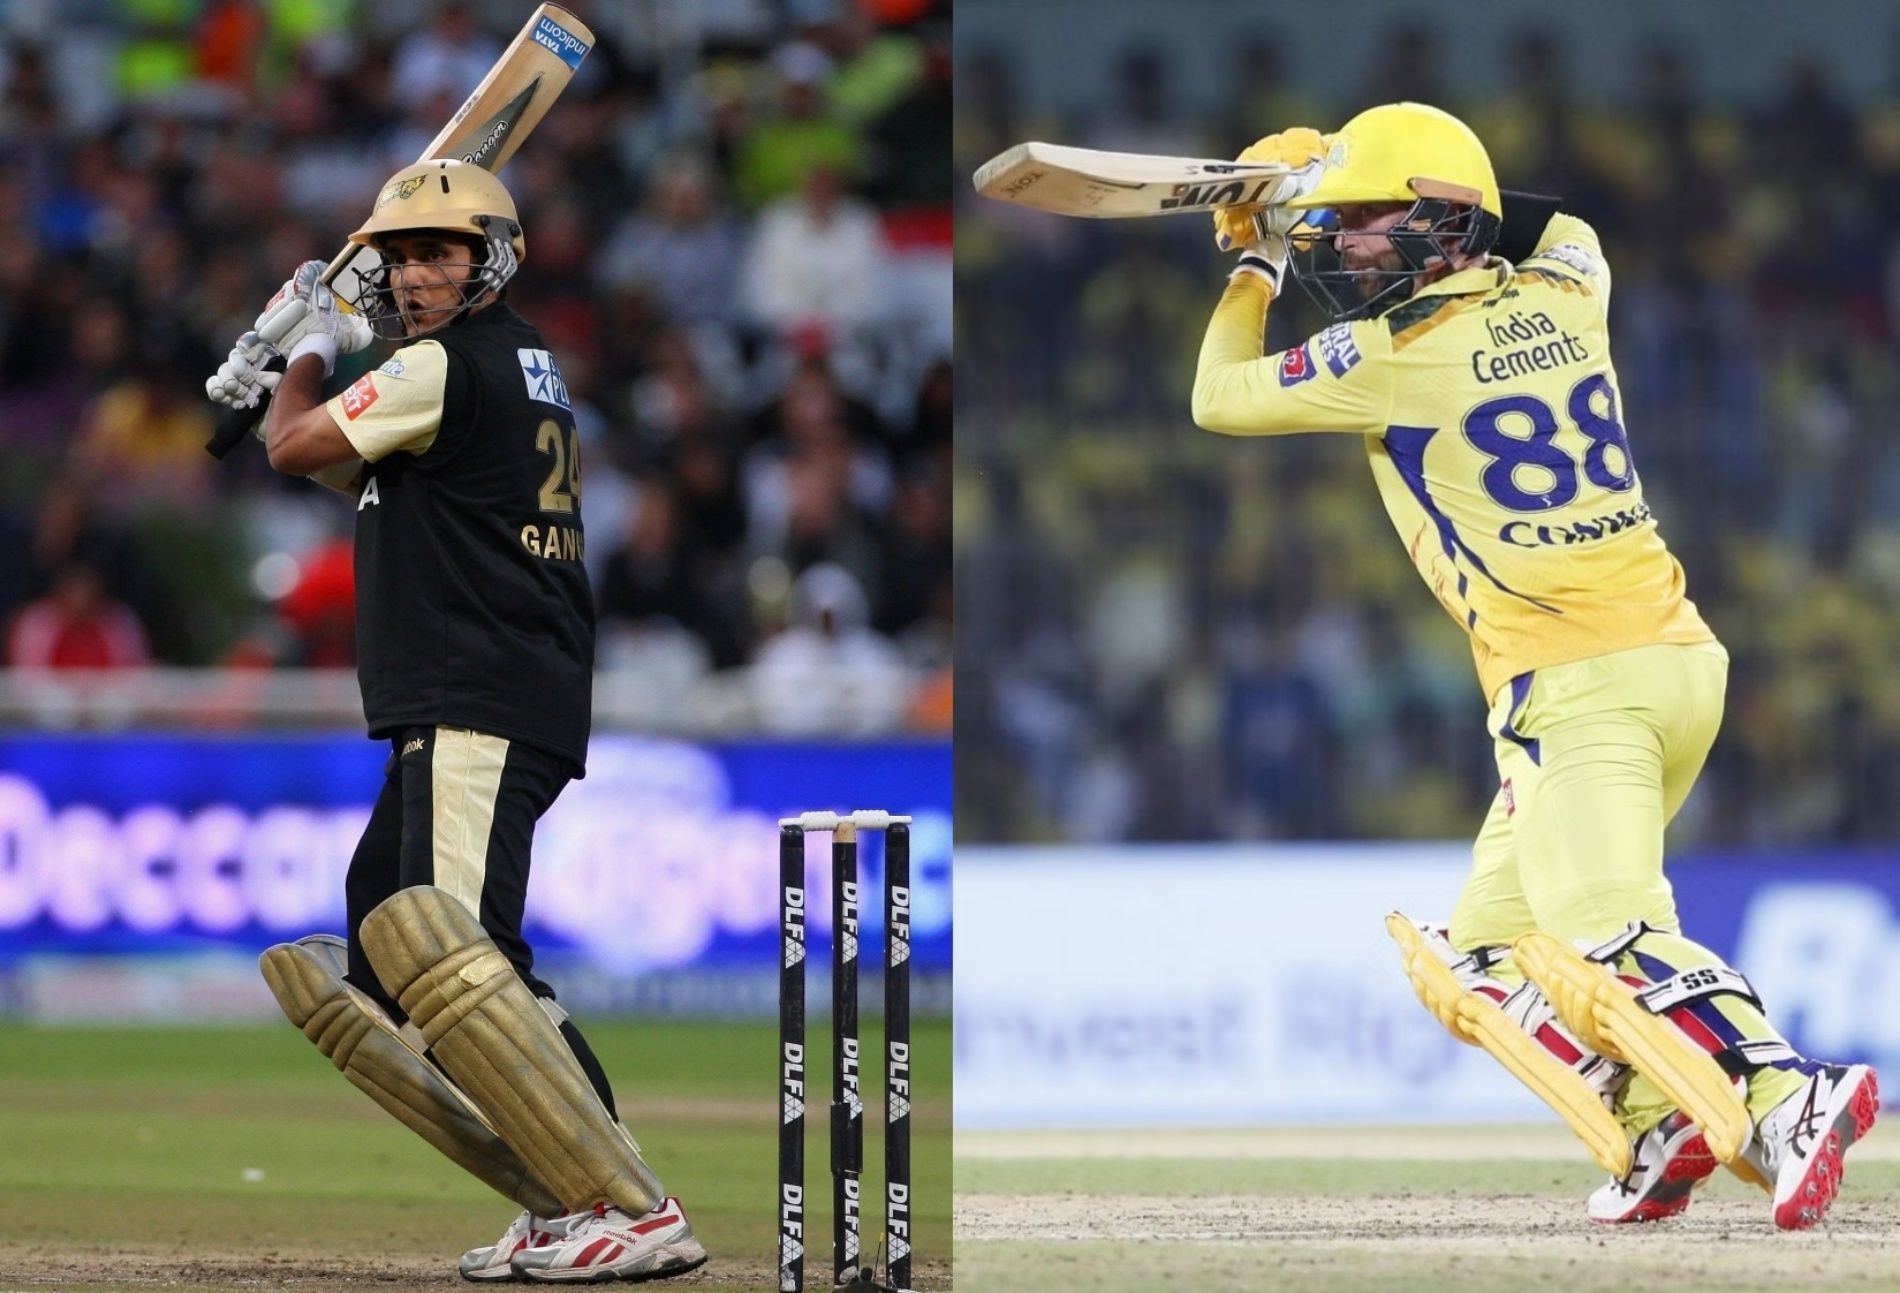 Sourav Ganguly (left) playing for KKR and Devon Conway (right) batting for CSK. (Pics: Getty Images)